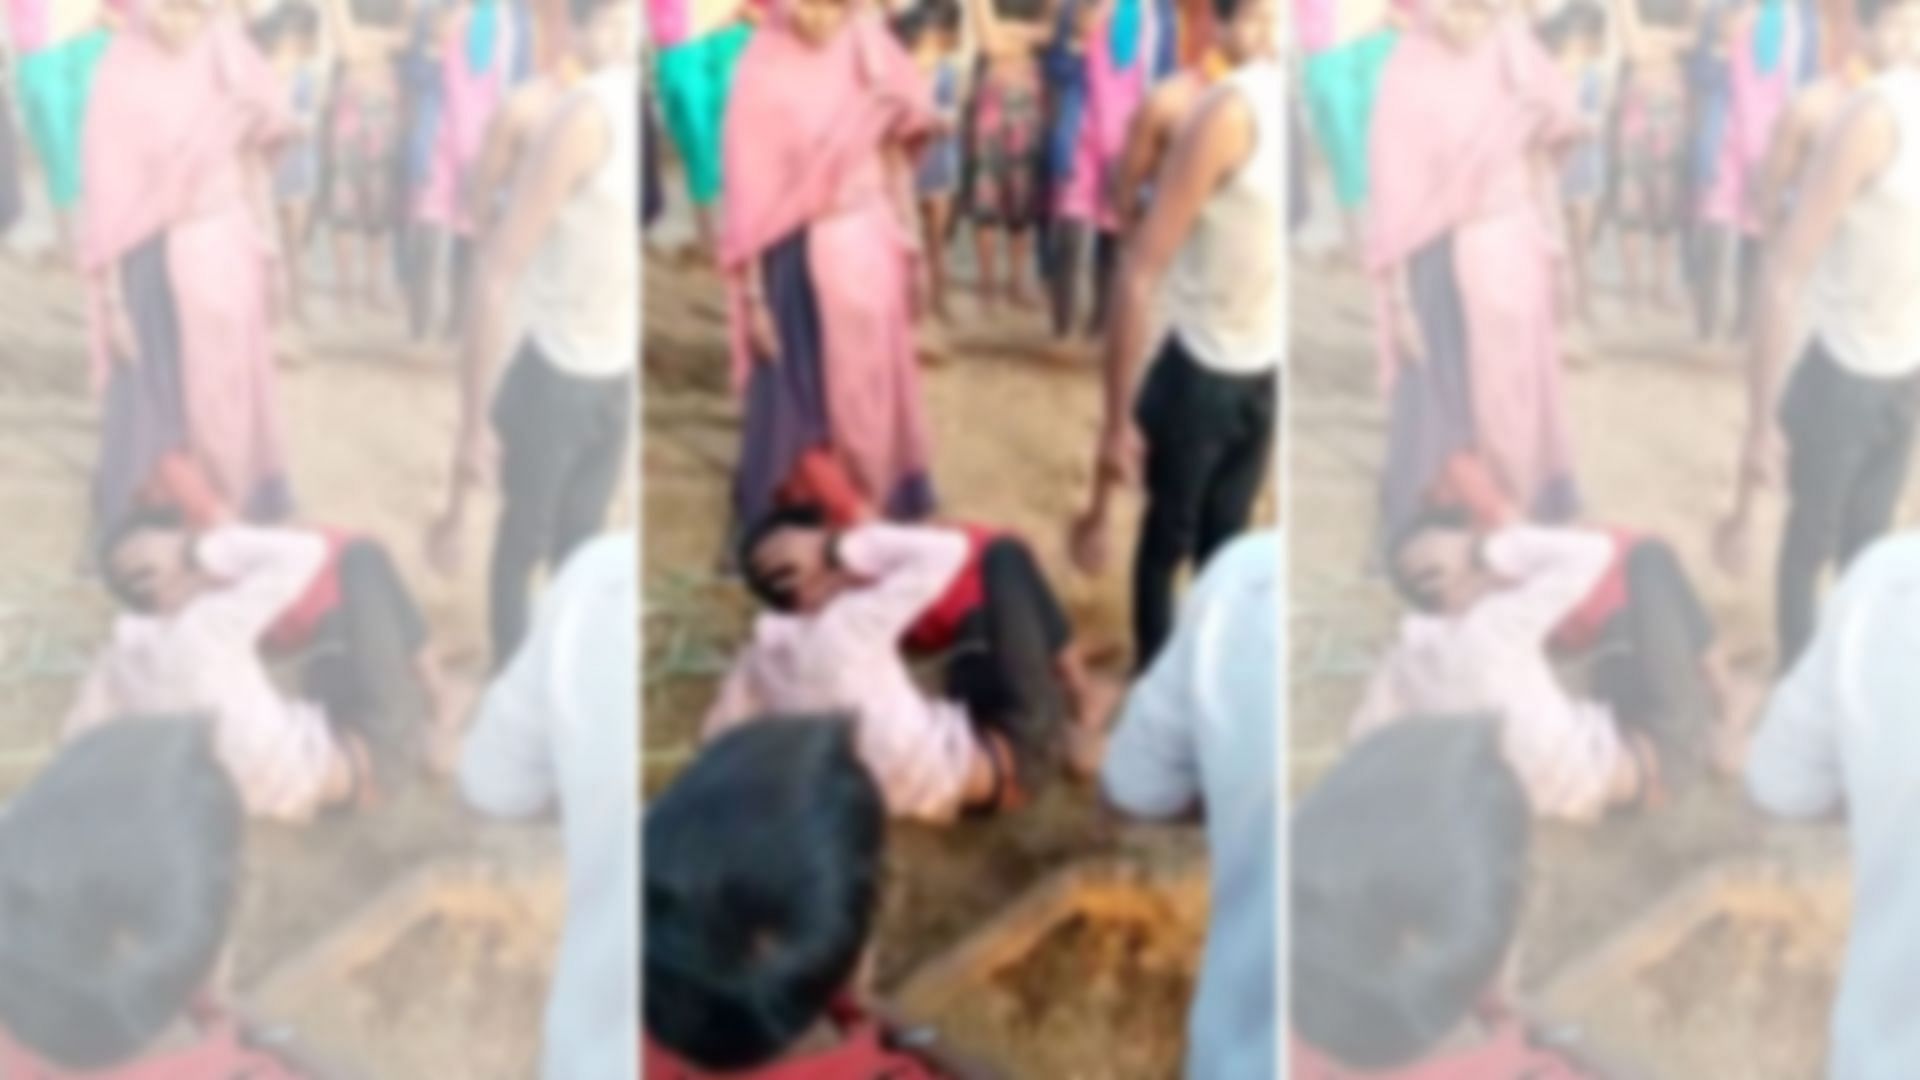 A video shows the survivor and accused being tied with ropes, forced to walk amid ‘Bharat Mata Ki Jai’ slogans.